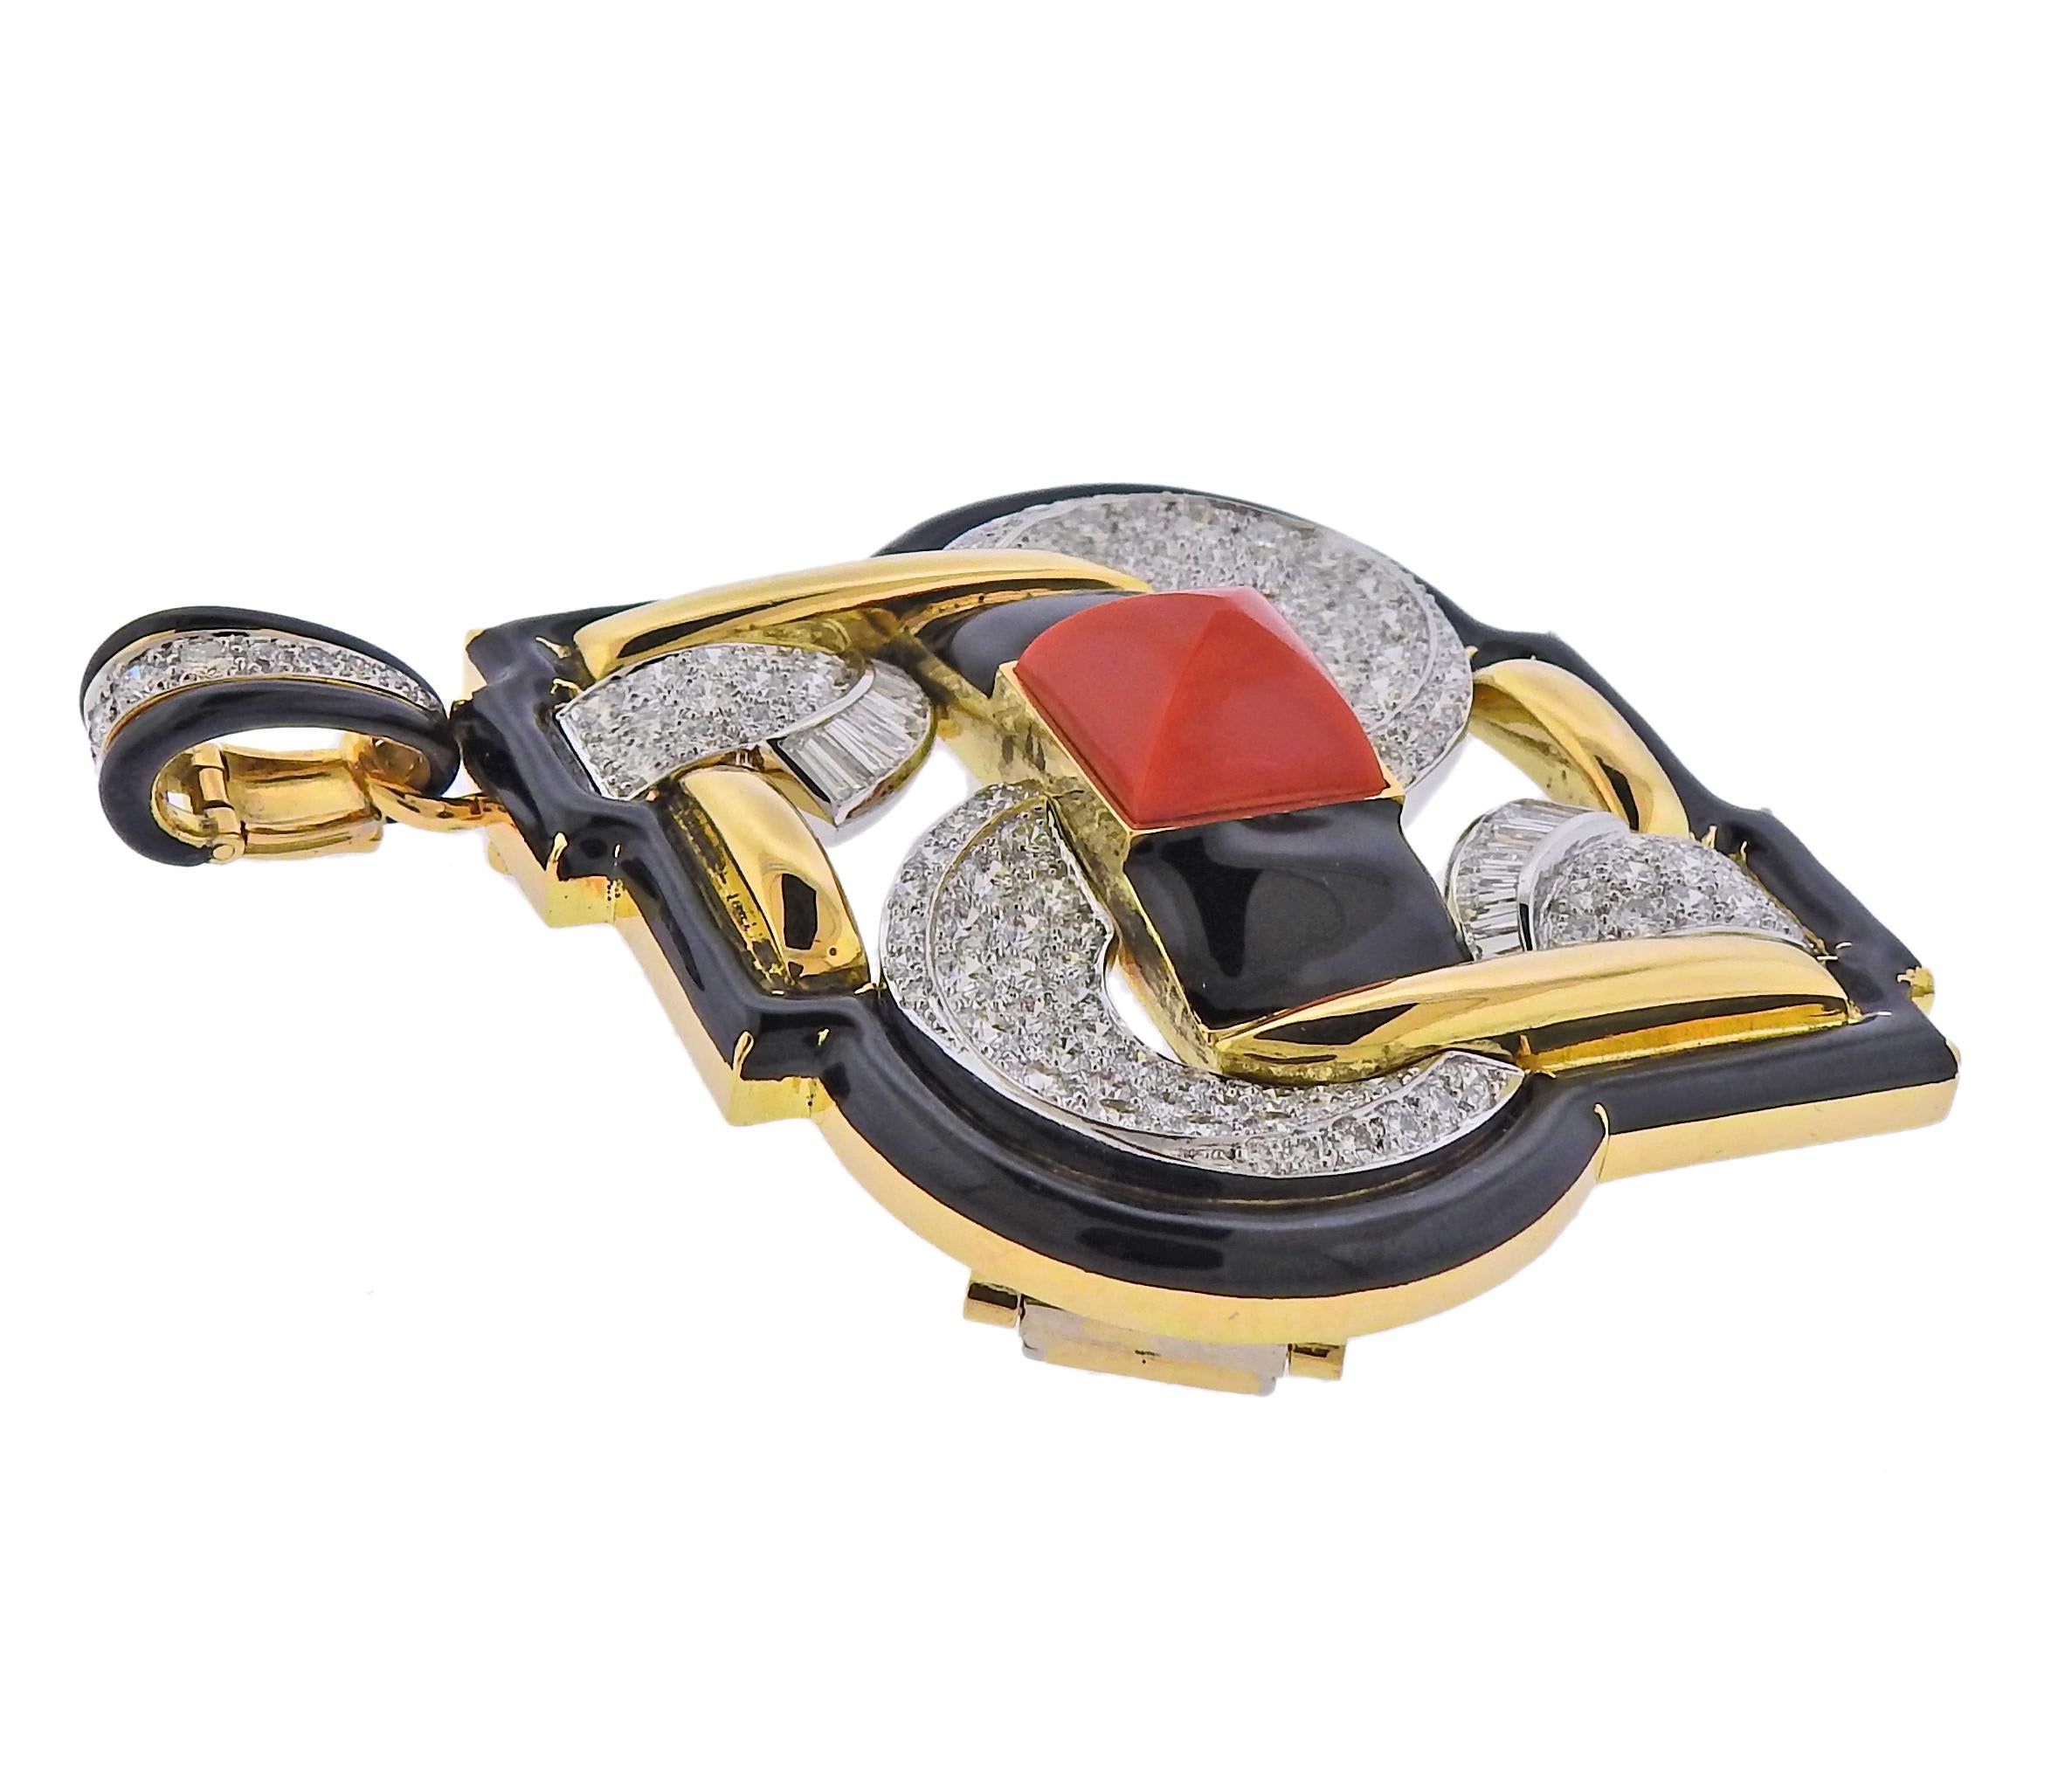 One of a kind pendant brooch, in 18k gold and platinum, crafted by David Webb, with coral and approx. 5.00cts in H/VS-SI1 diamonds. Pendant/brooch is 3